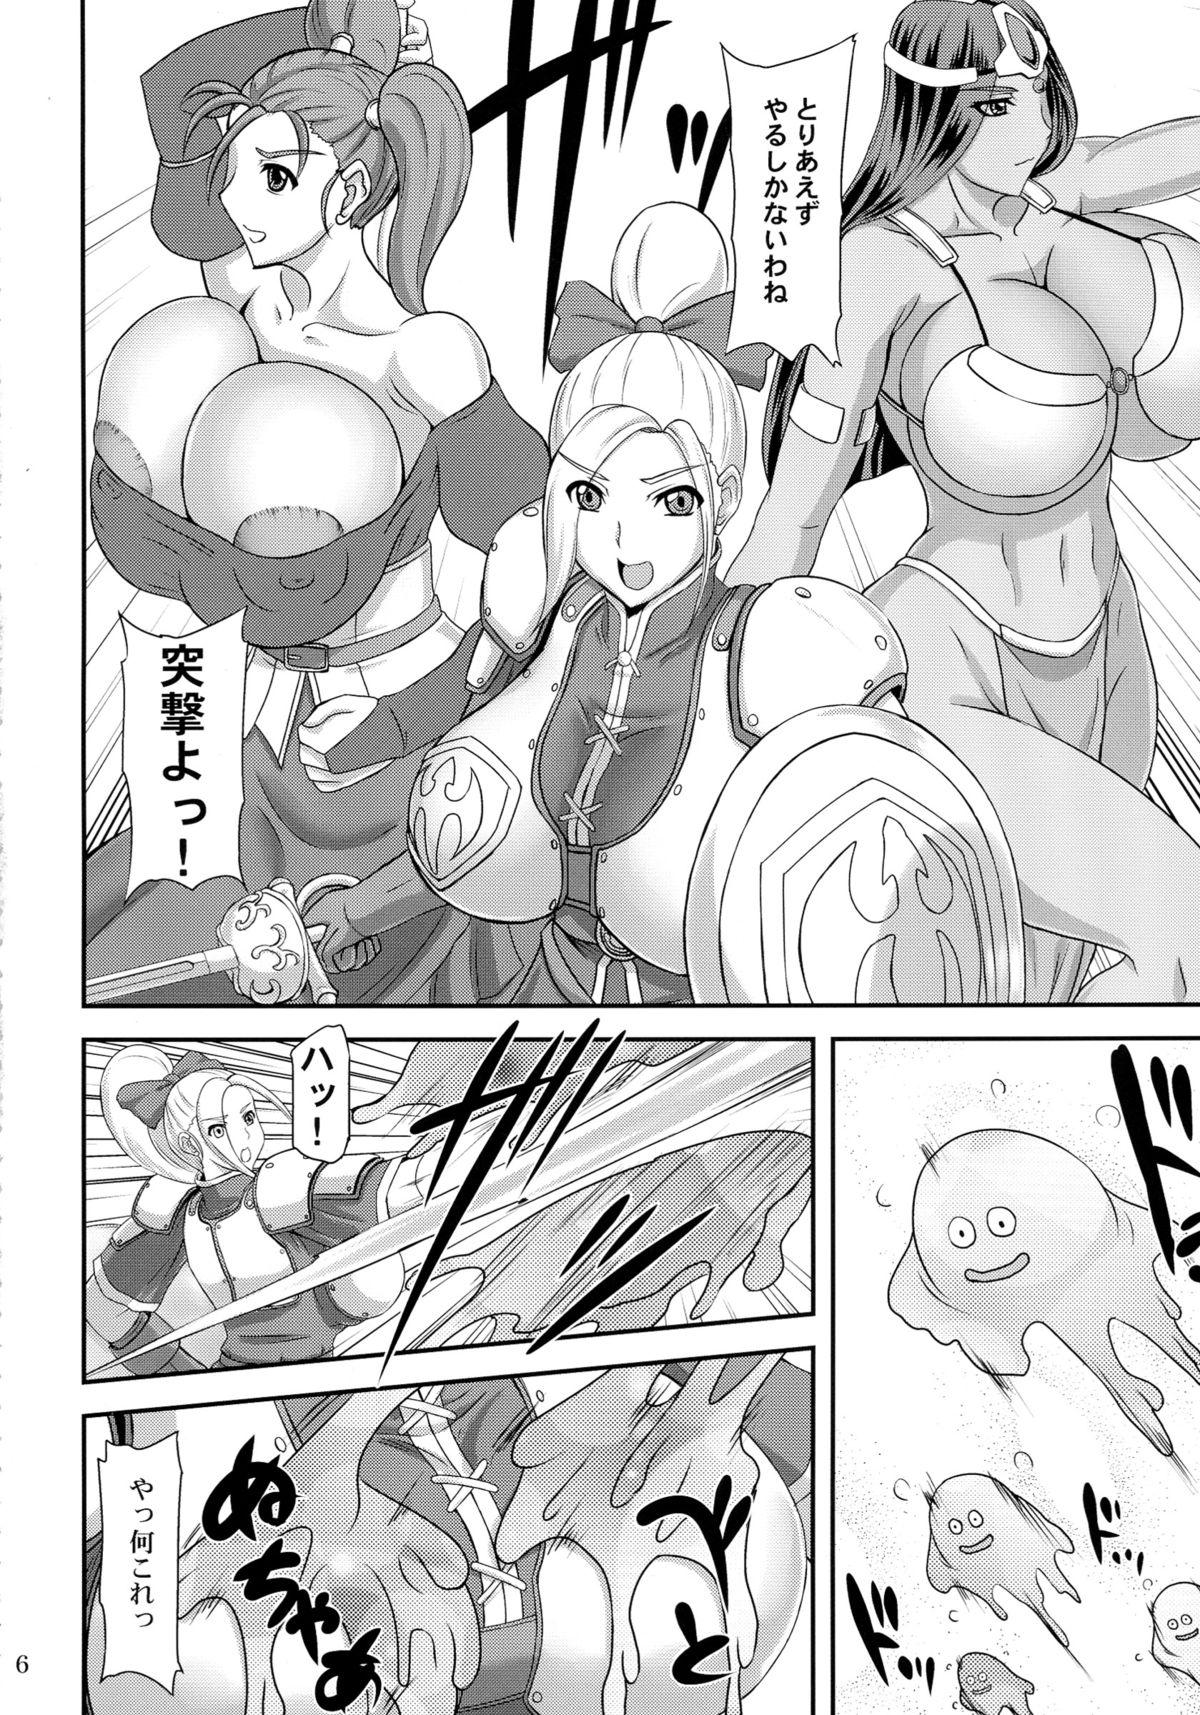 Shemales HEROINES vs MONSTERS - Dragon quest heroes Rubdown - Page 6